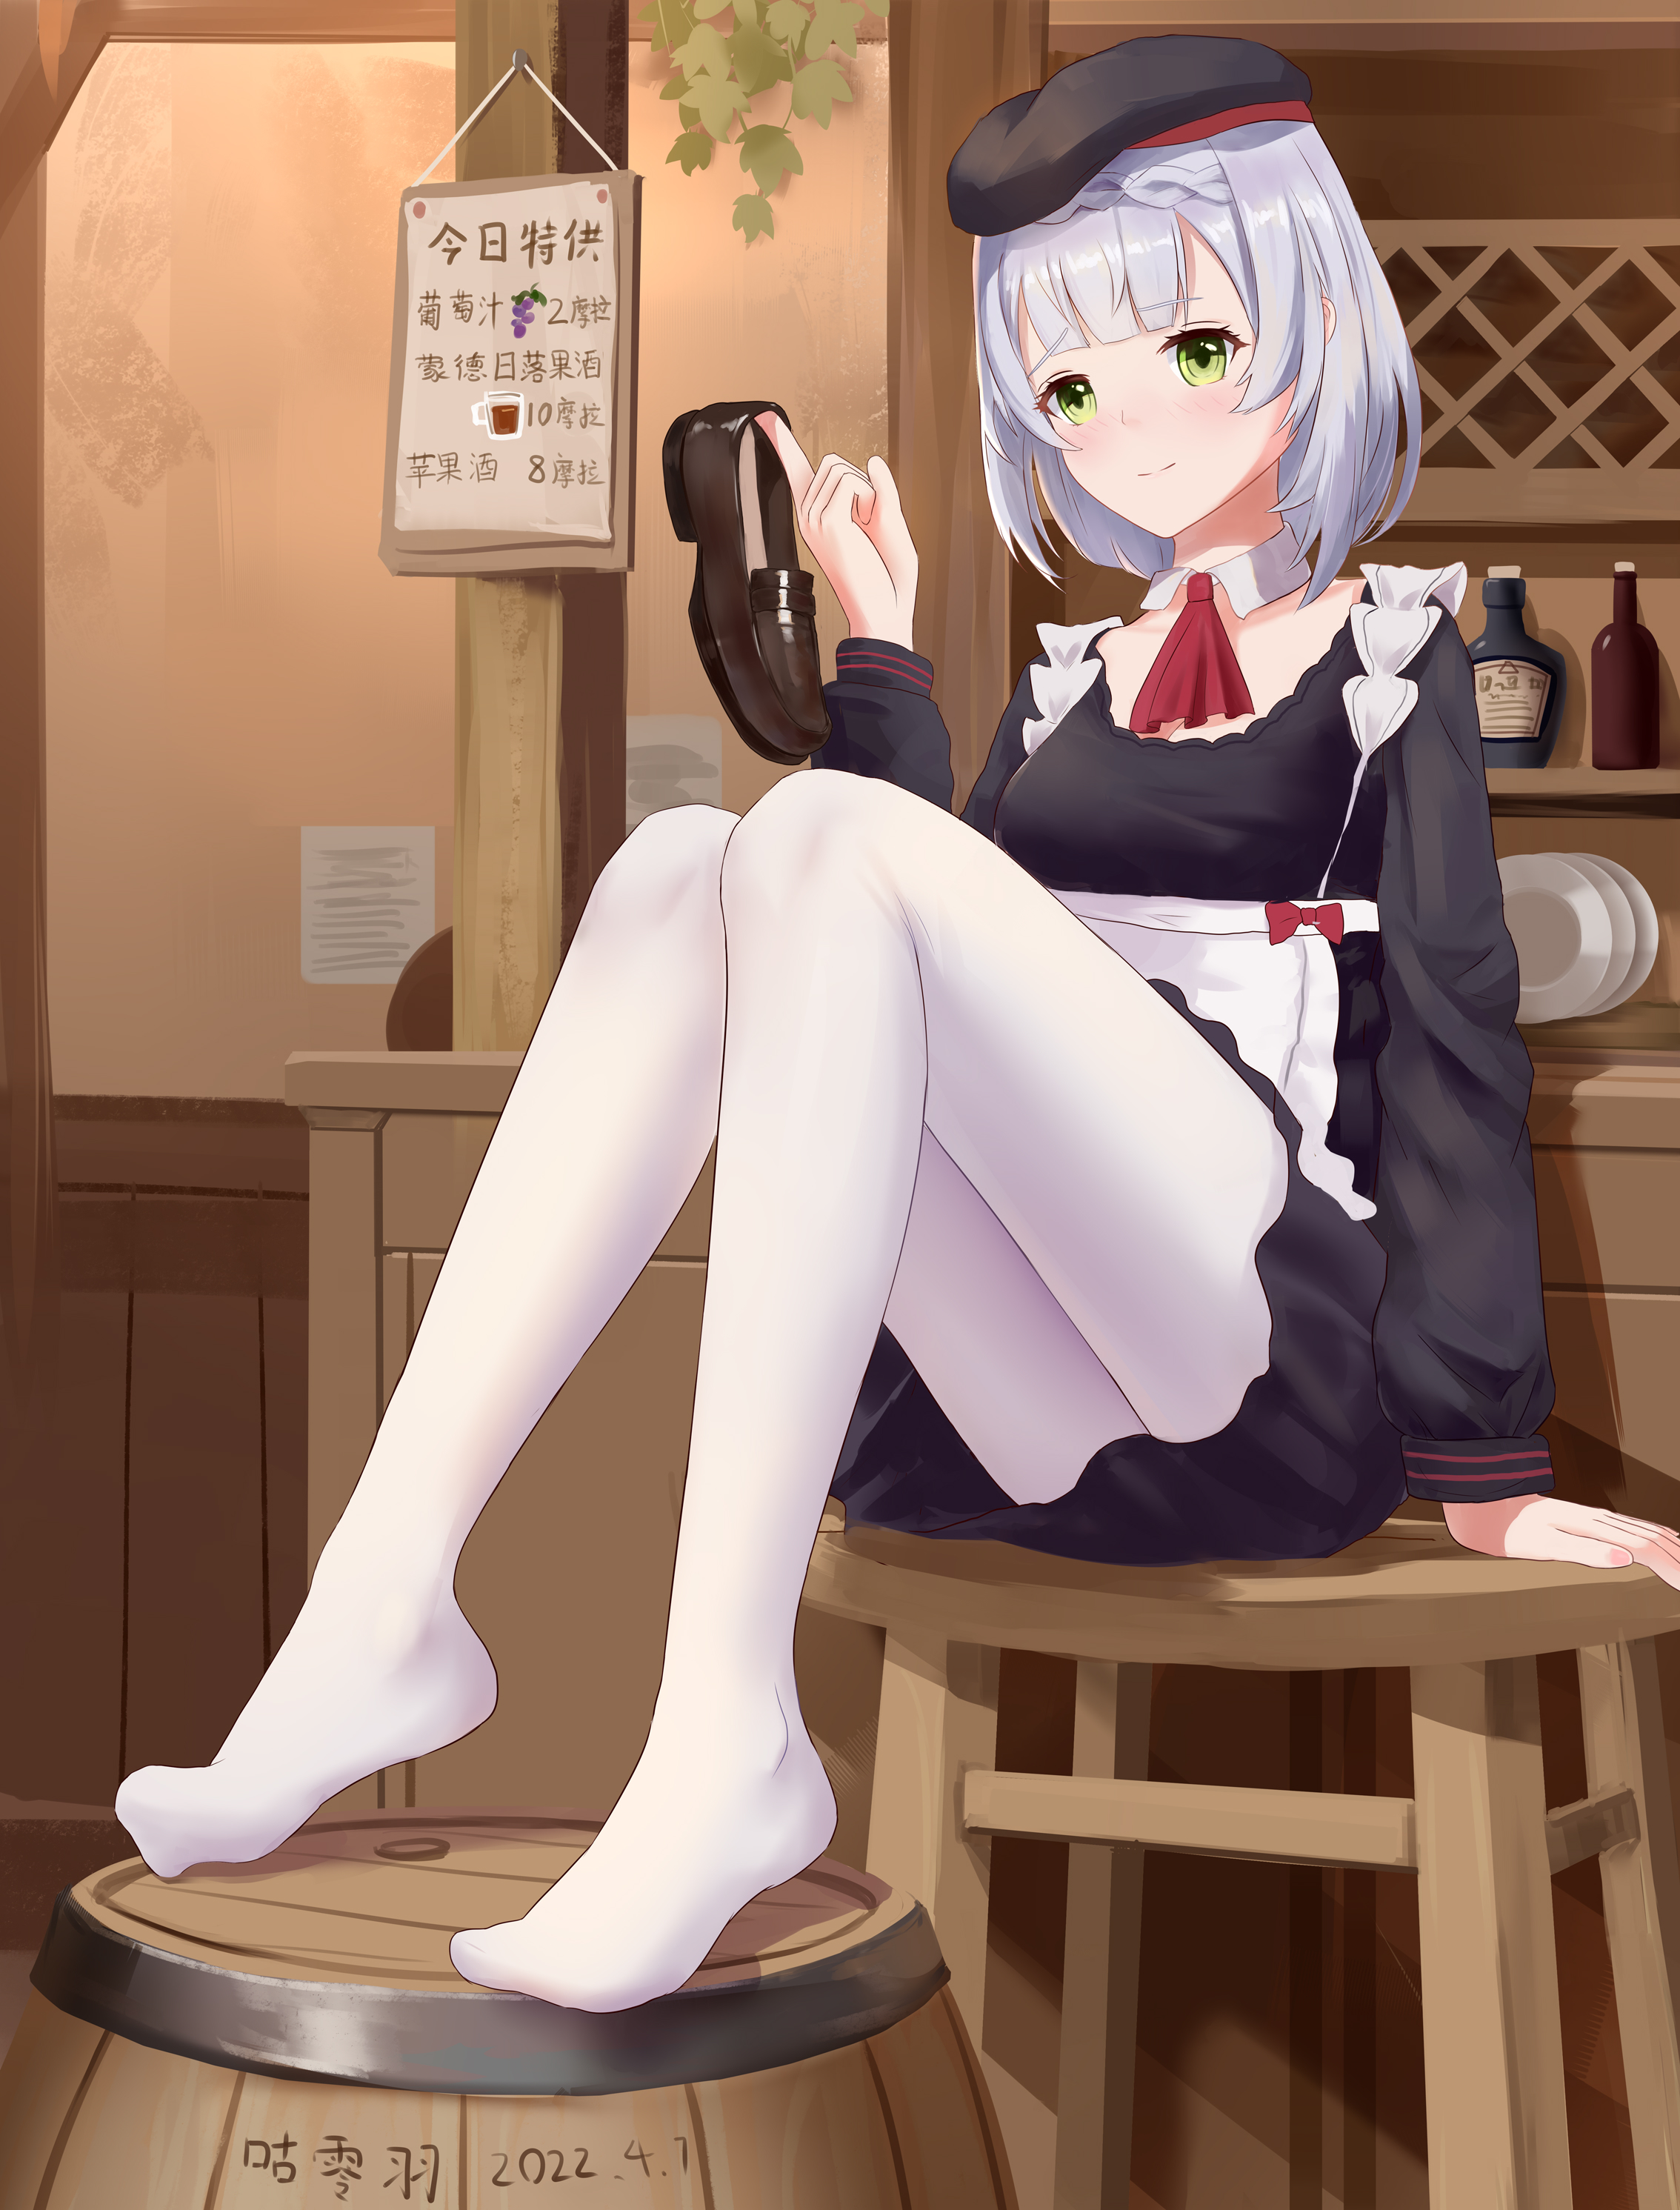 Anime Girls Vertical Japanese Shoes Maid Outfit Hat Barrels Blushing 2268x2983